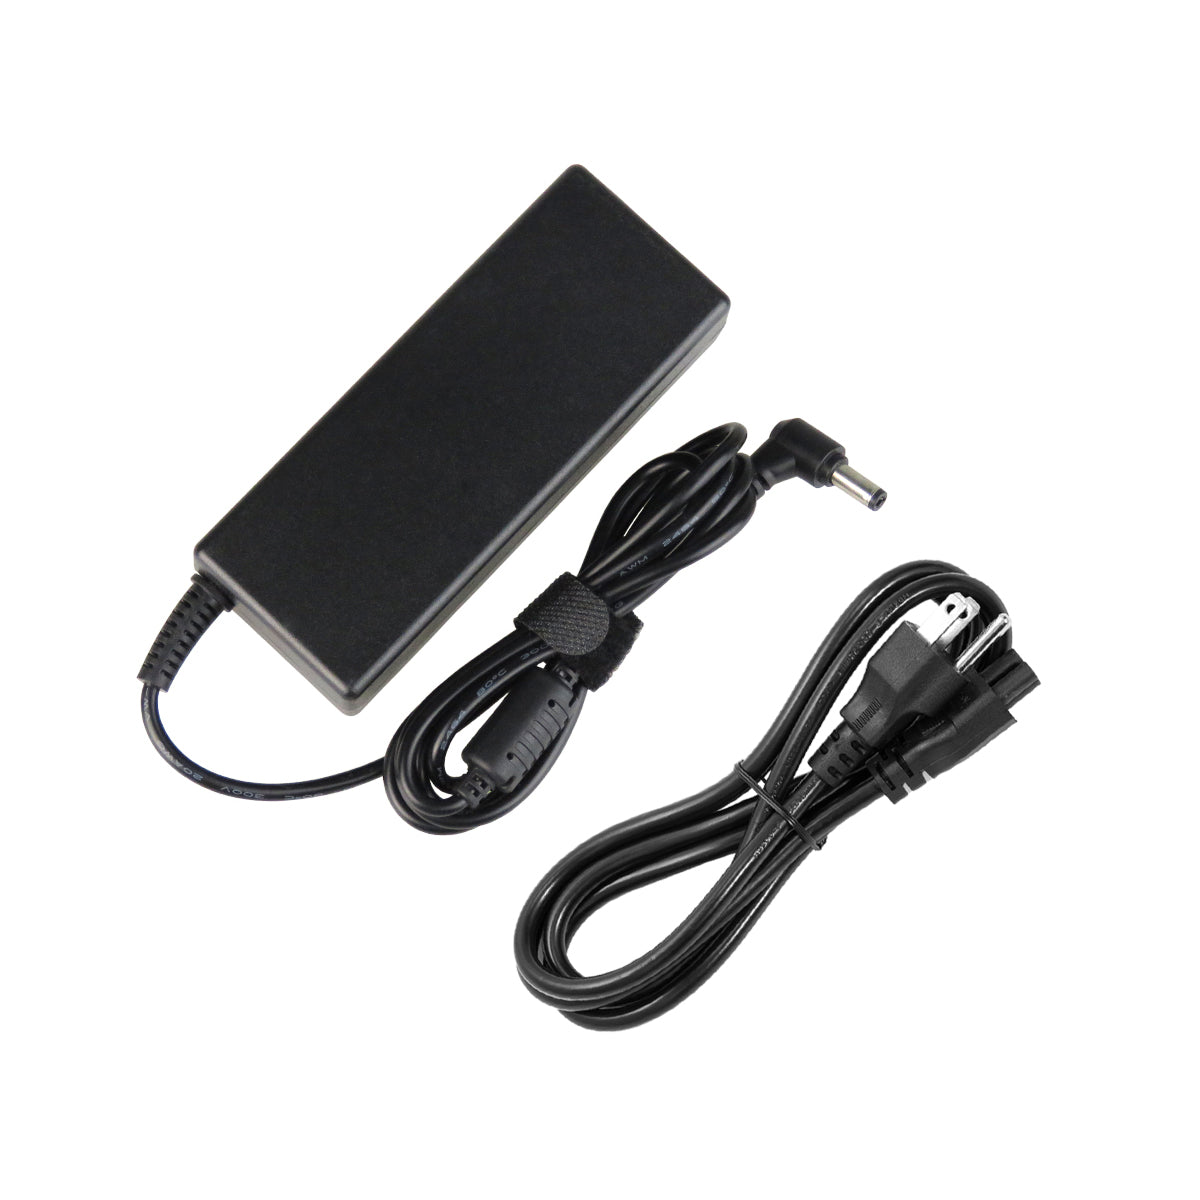 AC Adapter Charger for Toshiba Satellite l855d Notebook.